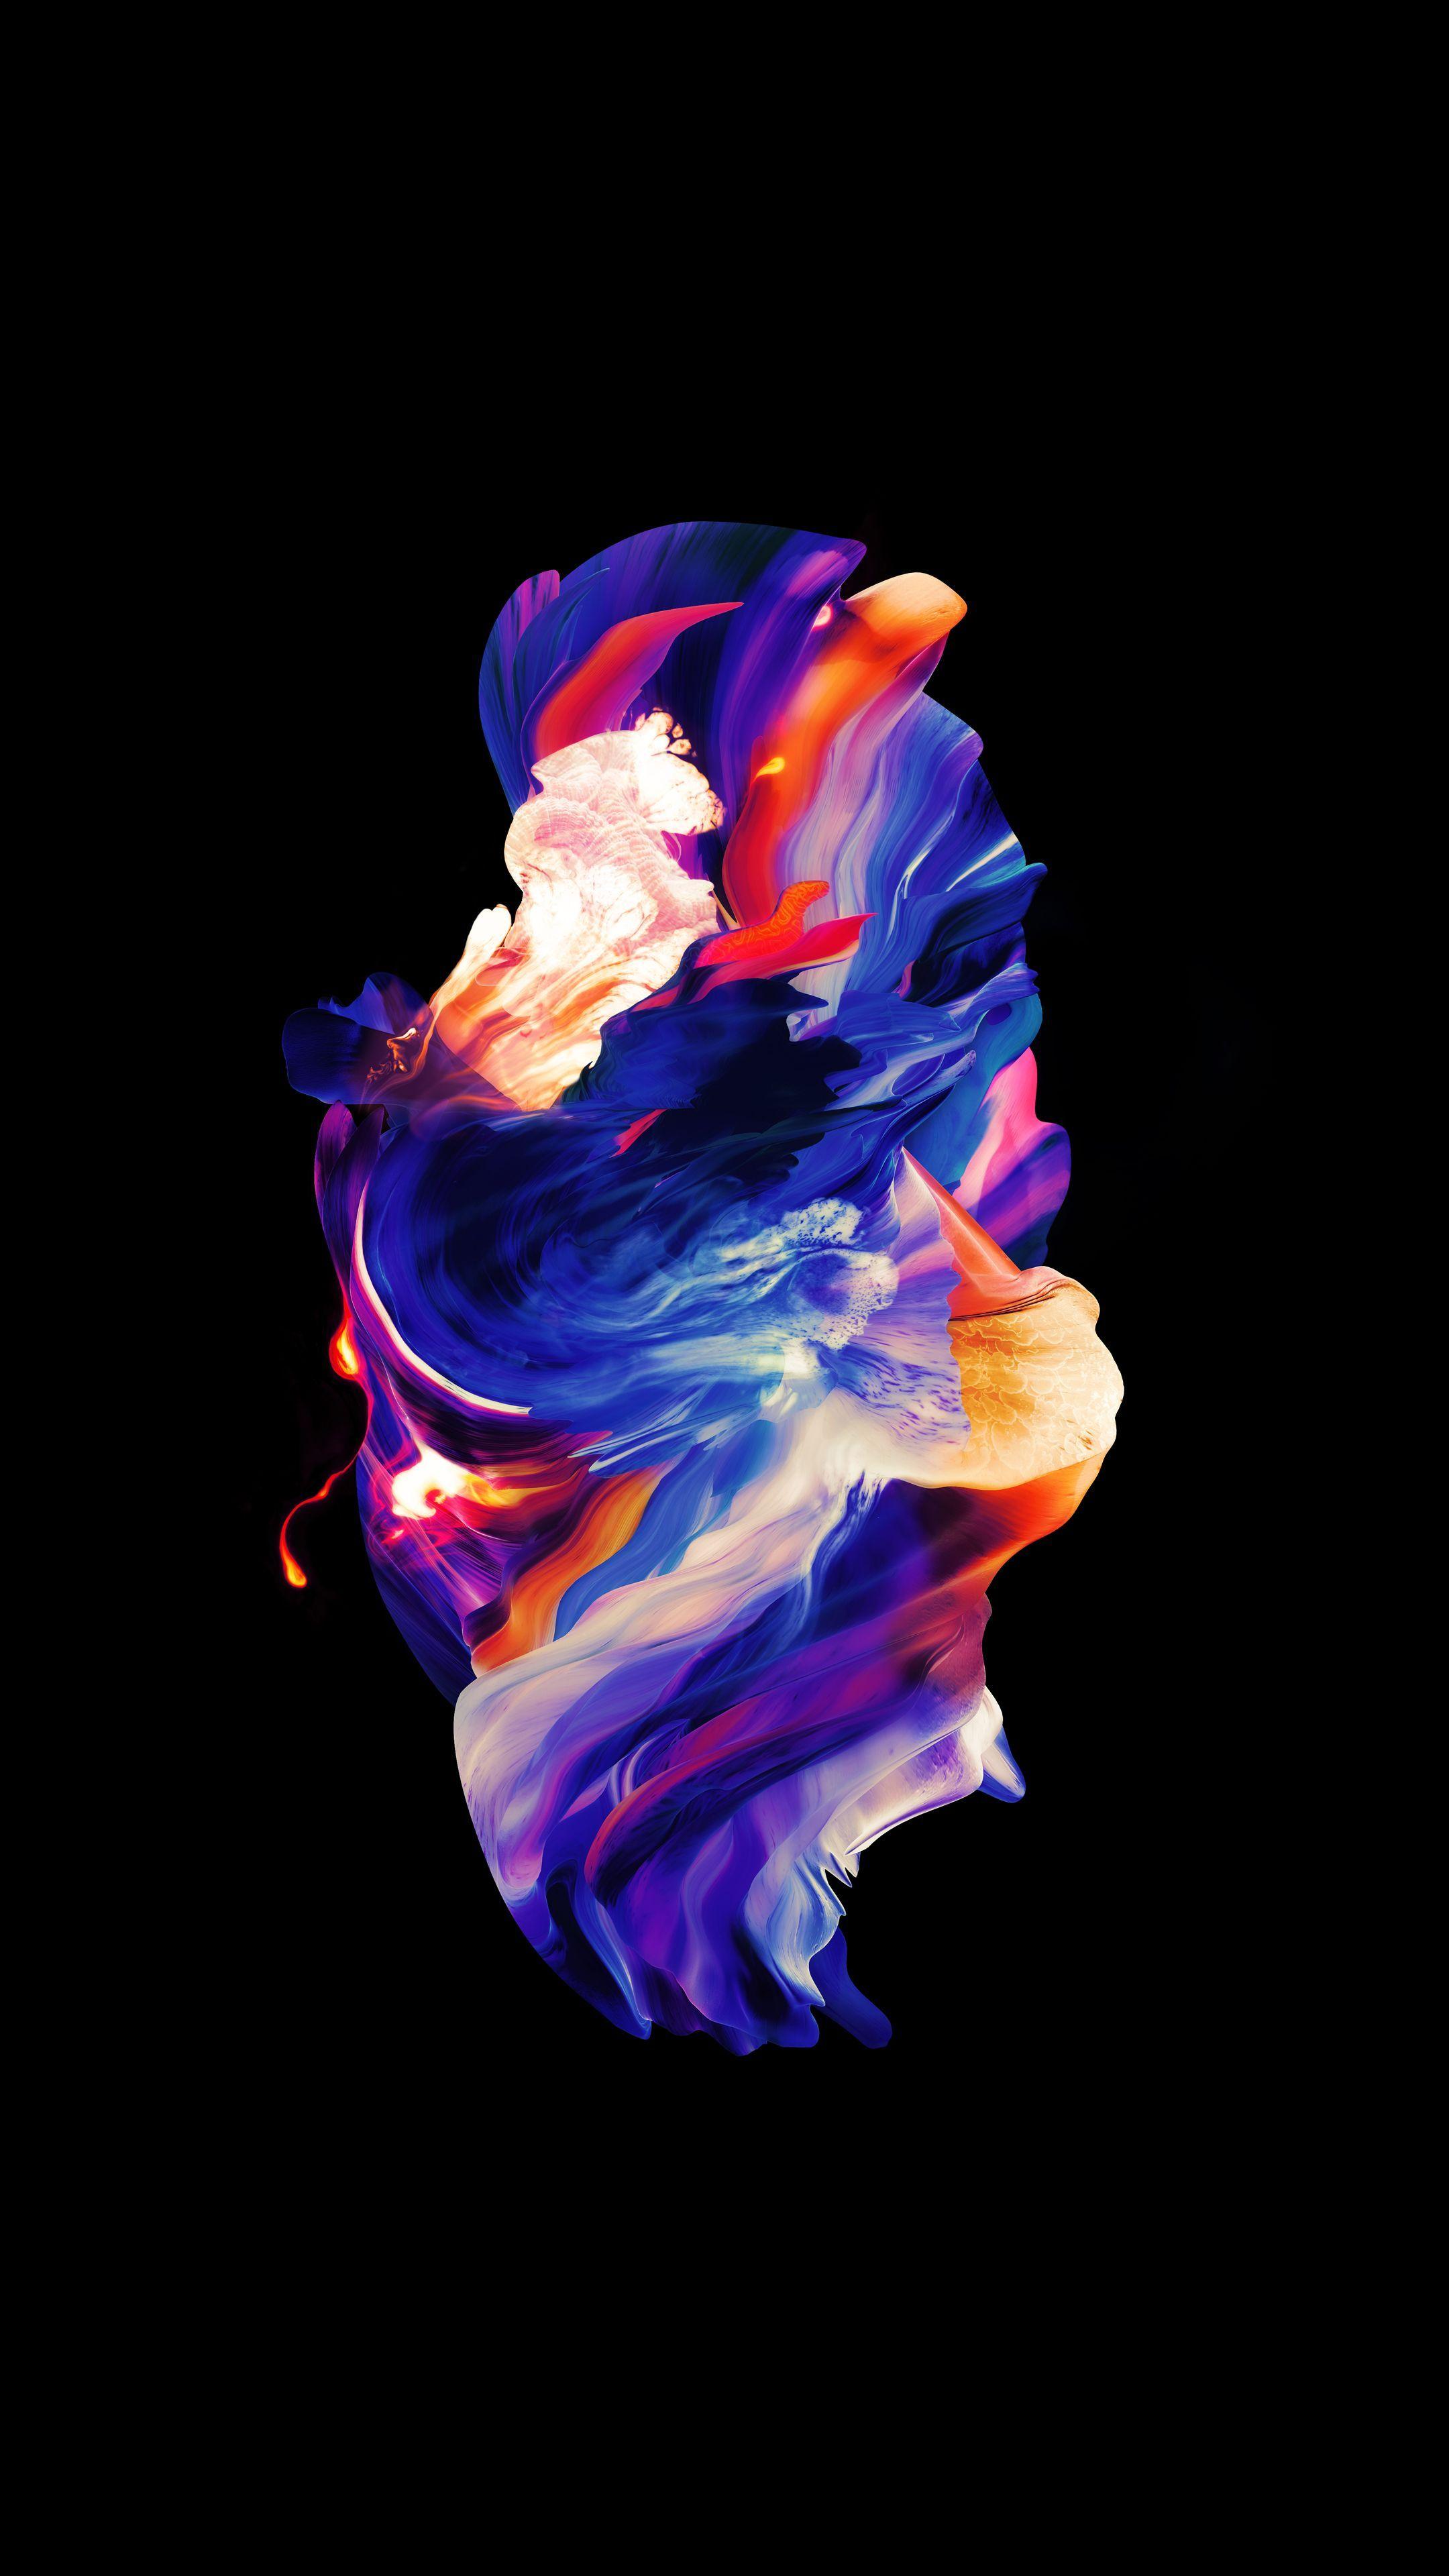 30,000+ Amoled Wallpaper Pictures | Download Free Images on Unsplash